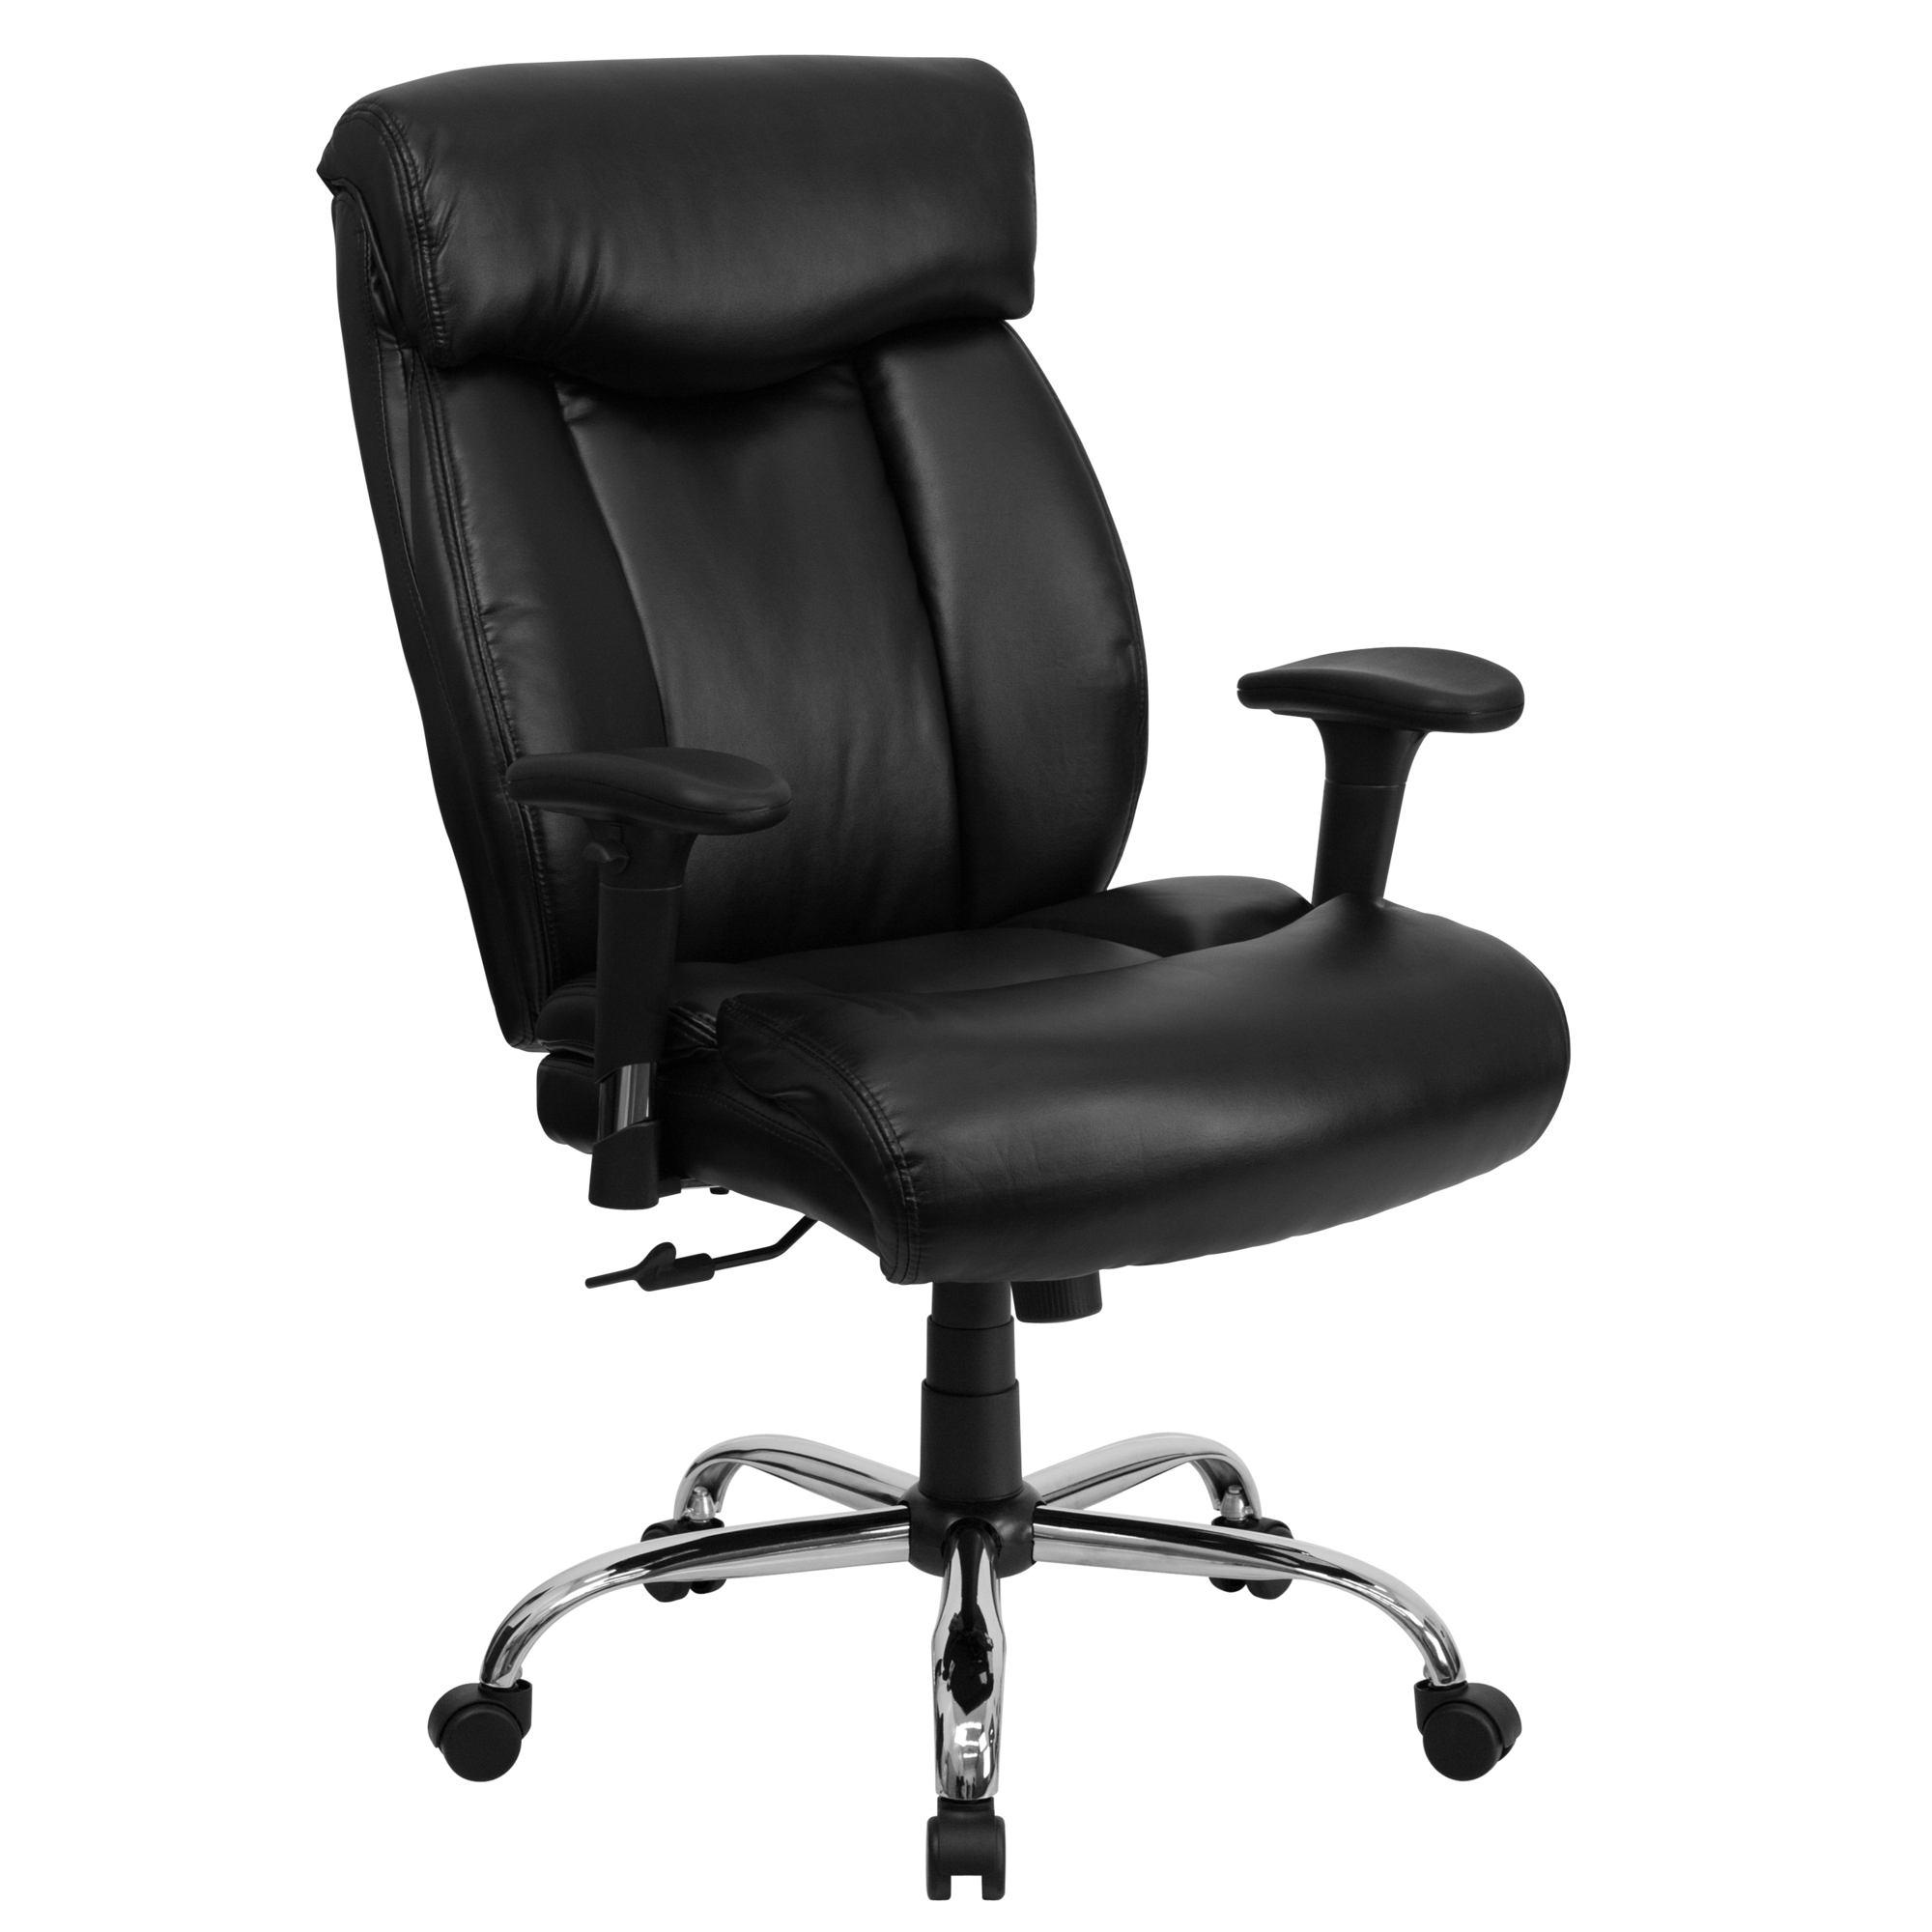 Flash Furniture, Big Tall 400 lb. Rated Black LeatherSoft Chair, Primary Color Black, Included (qty.) 1, Model GO1235BKLEAA